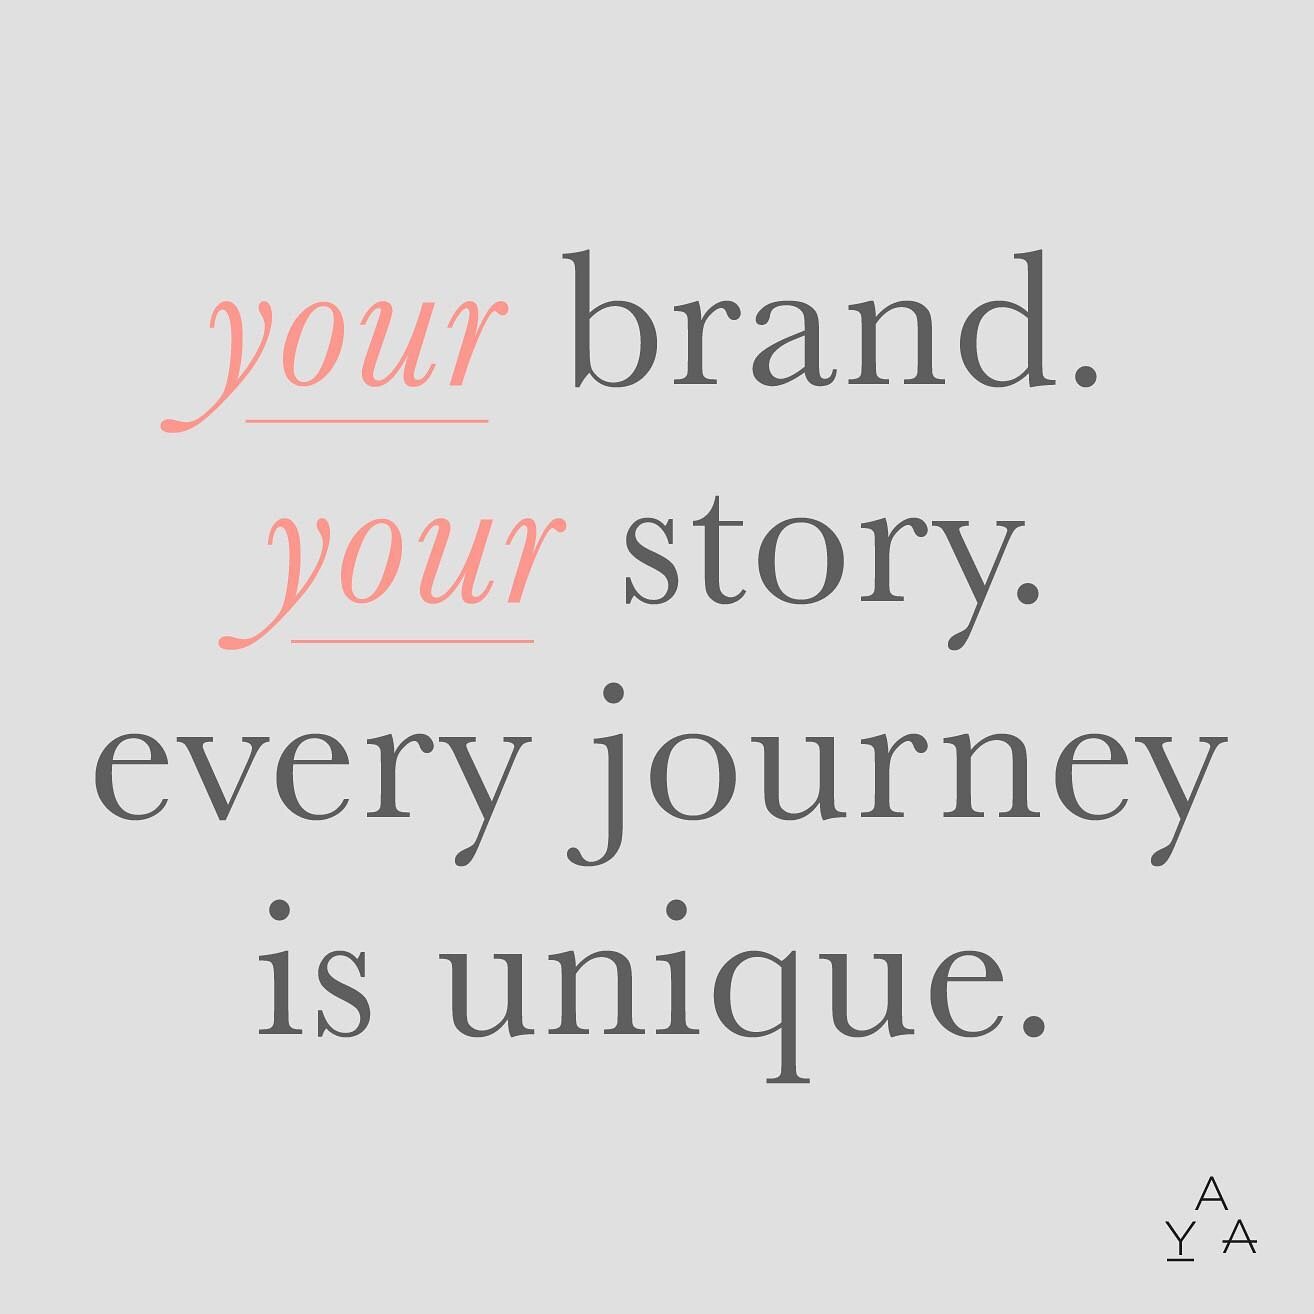 That&rsquo;s what makes you unique. That&rsquo;s what makes your business special. 

Every brand is unique if it is crafted and nurtured in the right way. Whether you&rsquo;re a small start up, or global giant, your brand is a reflection of your valu